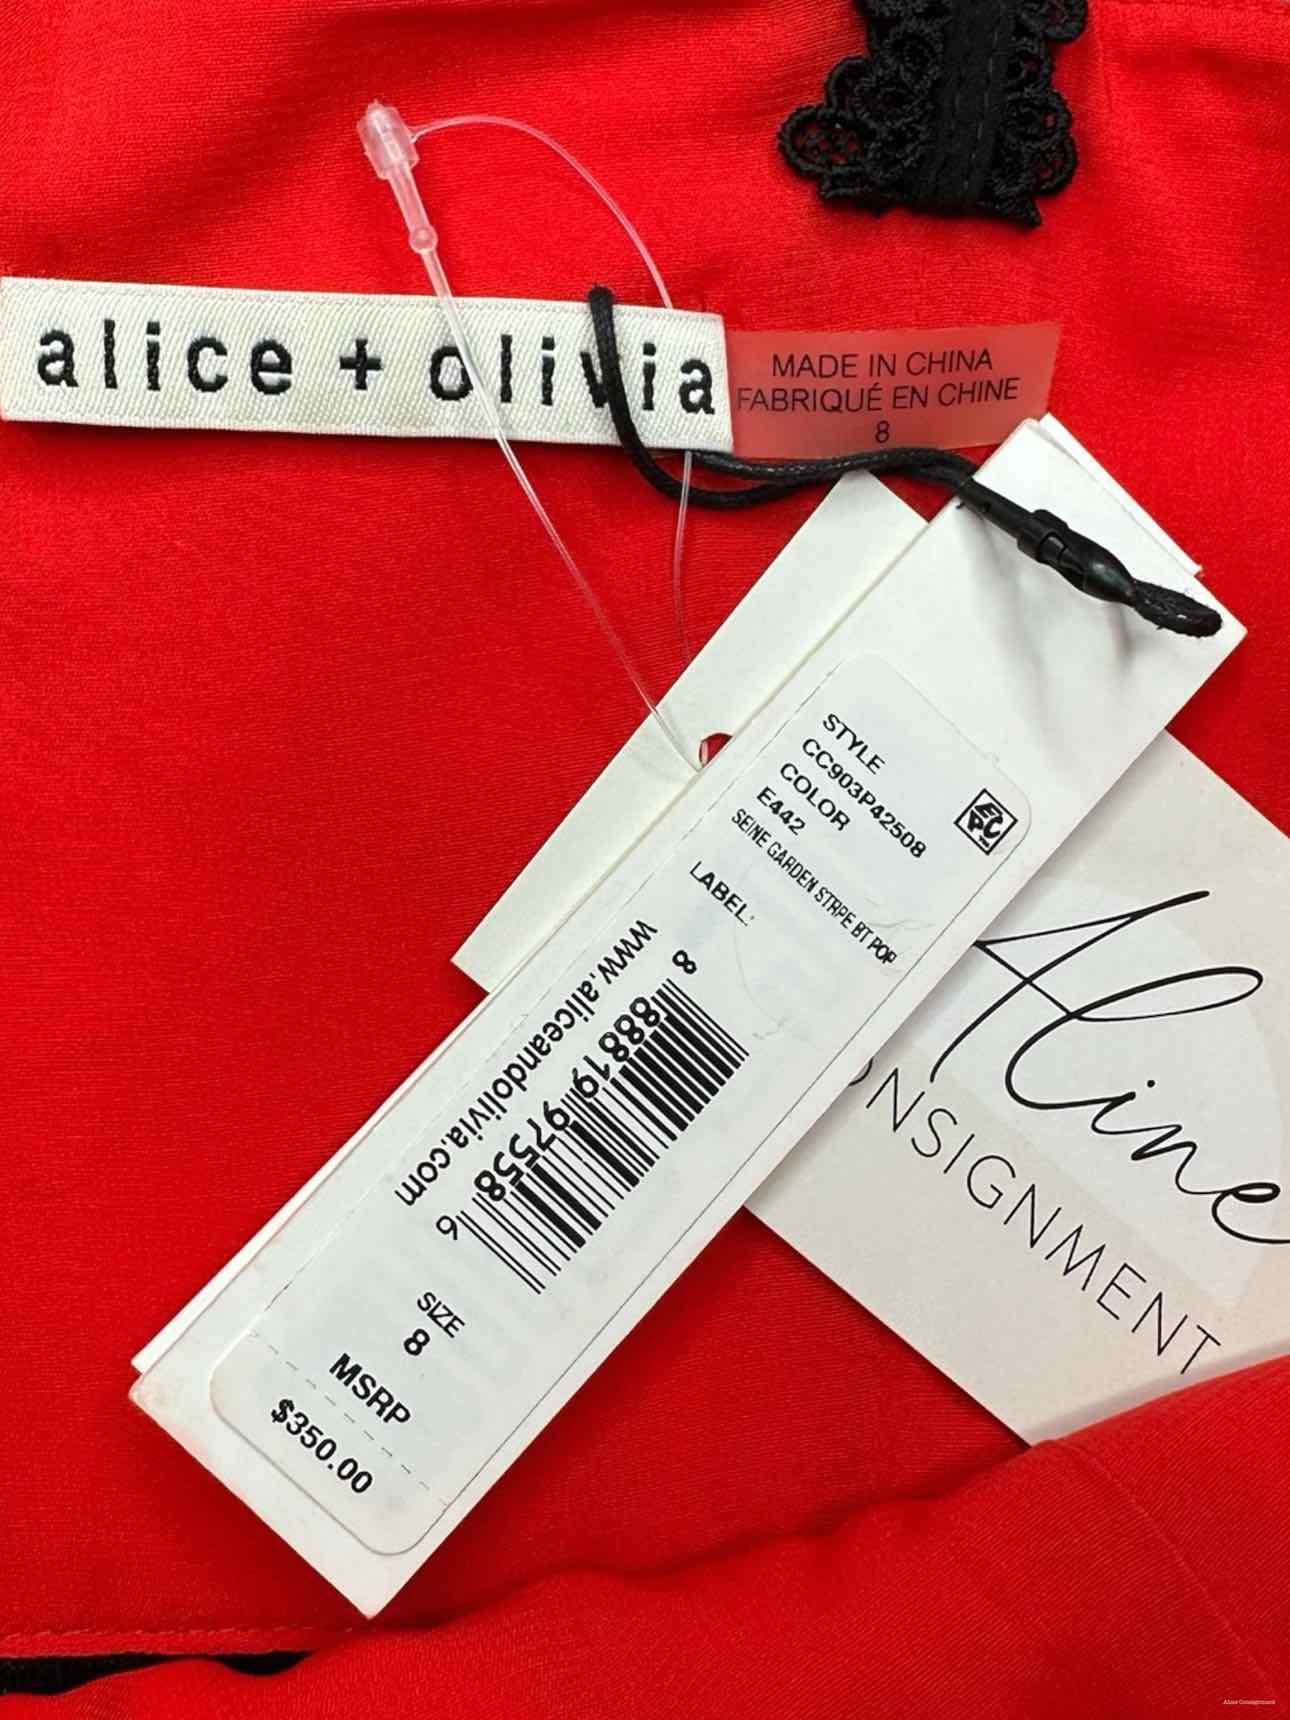 alice & olivia NWT Red Floral Print Cocktail Dress Size 8